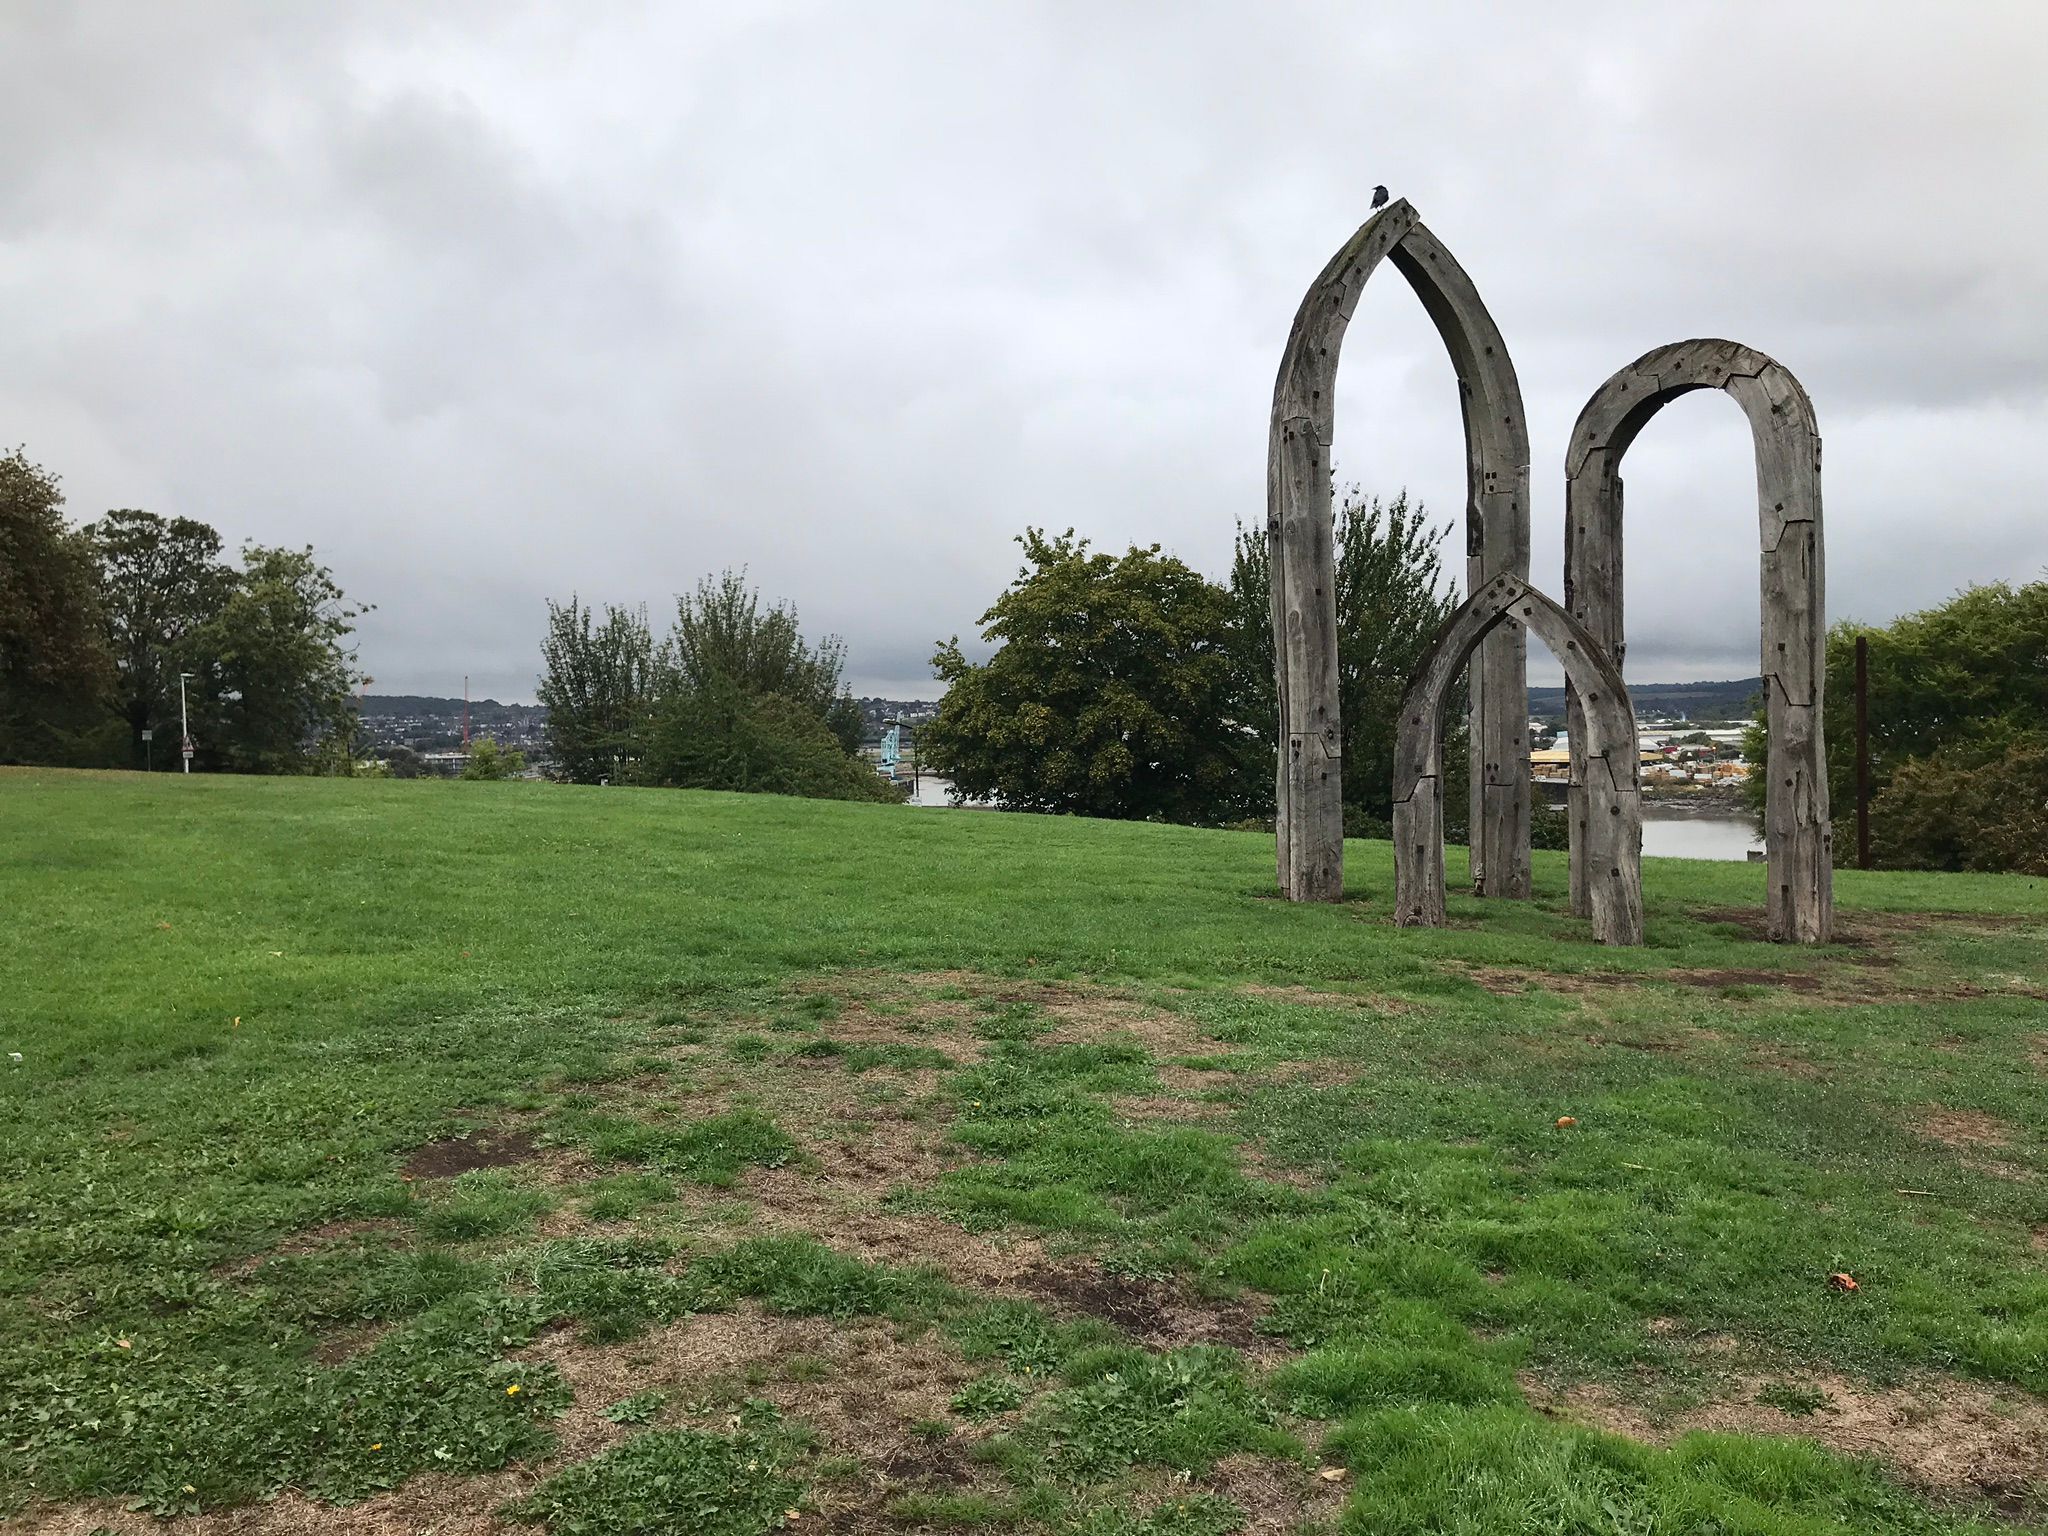 Large wooden arches looking out over Fort Pitt Hill and Victoria Gardens.